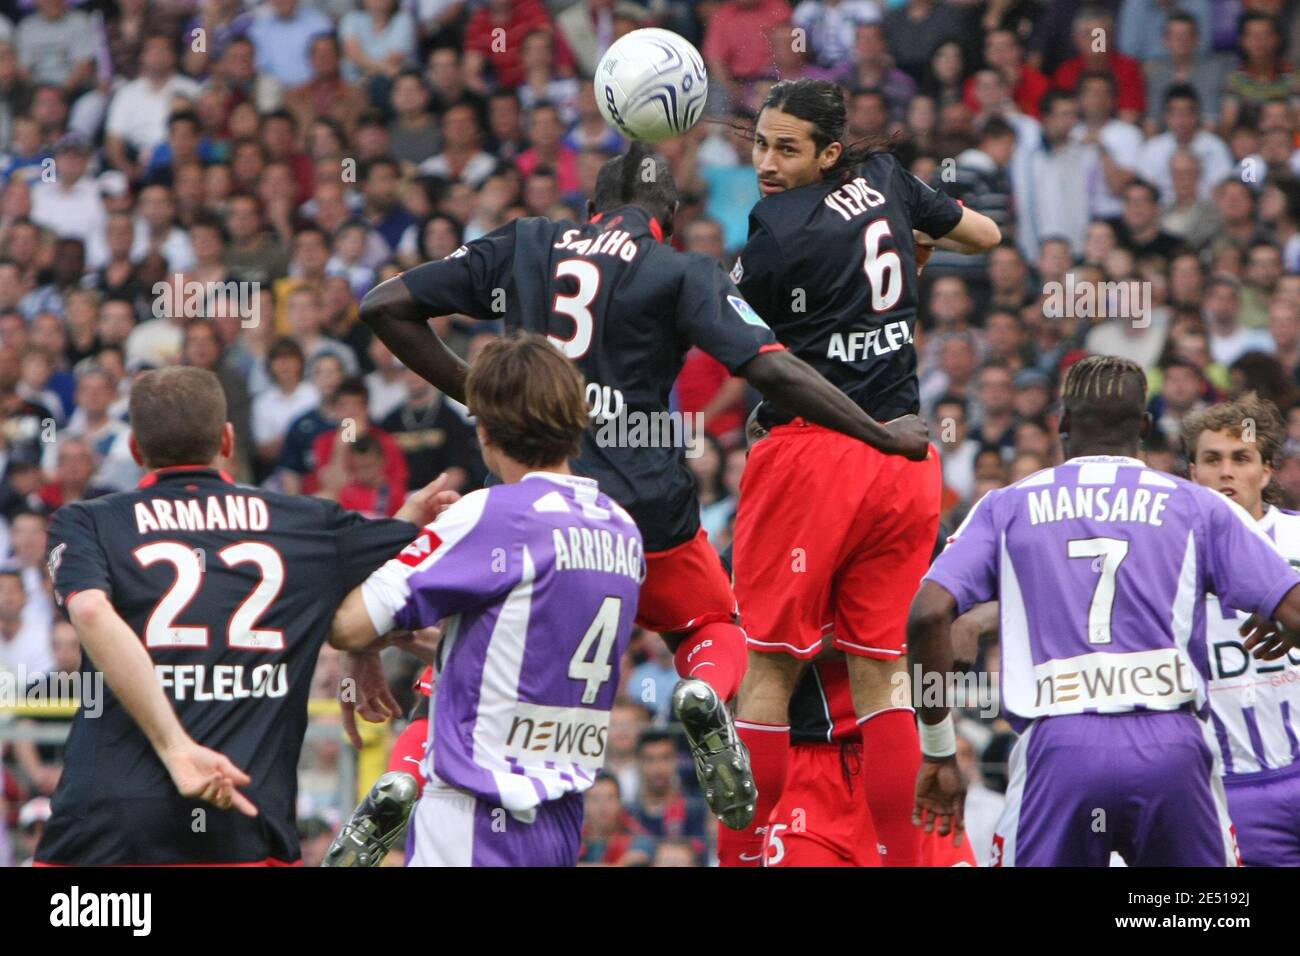 PSG's Mario Yepes during the French First leaugue Soccer match, FC Toulouse vs Paris Saint-Germain at the Ernest Wallon Stadium in Toulouse, France on May 3, 2008. The match ended in a 1-1 draw. Photo by Alex/Cameleon/ABACAPRESS.COM Stock Photo